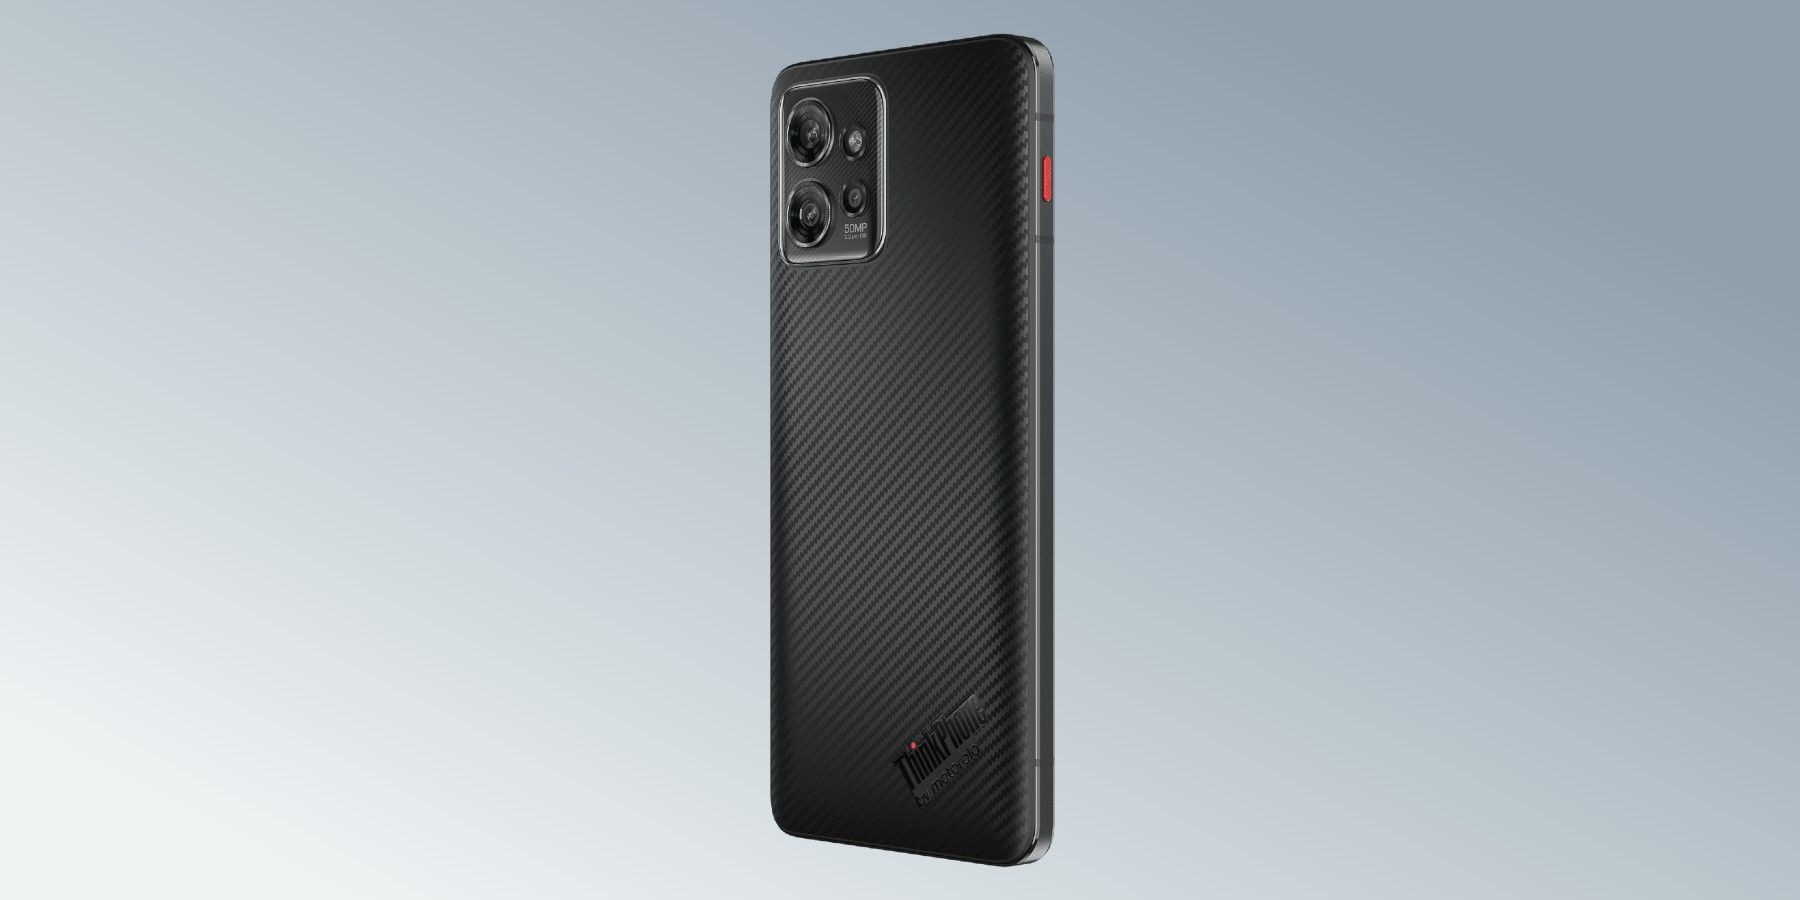 A photo showing the back of the ThinkPhone by Motorola smartphone